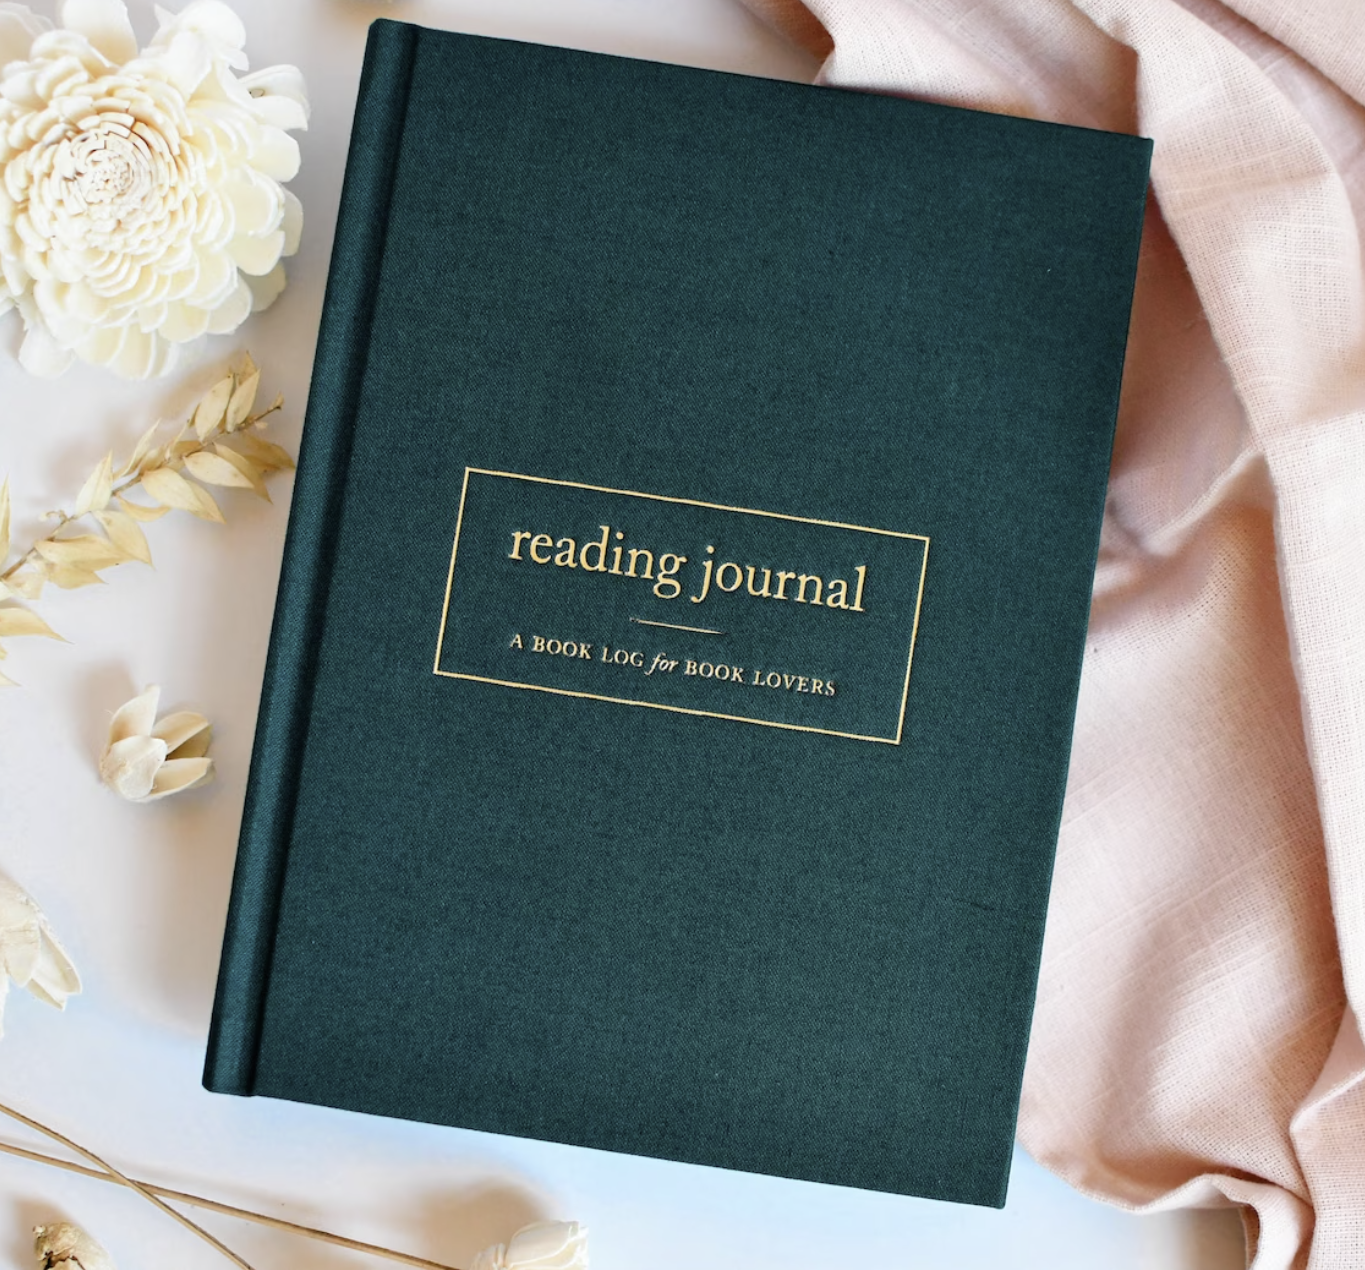 Dark green hardbound reading journal with gold text in the center of a small rectangular border that says: "Reading Journal. A Book log for Book lovers." 